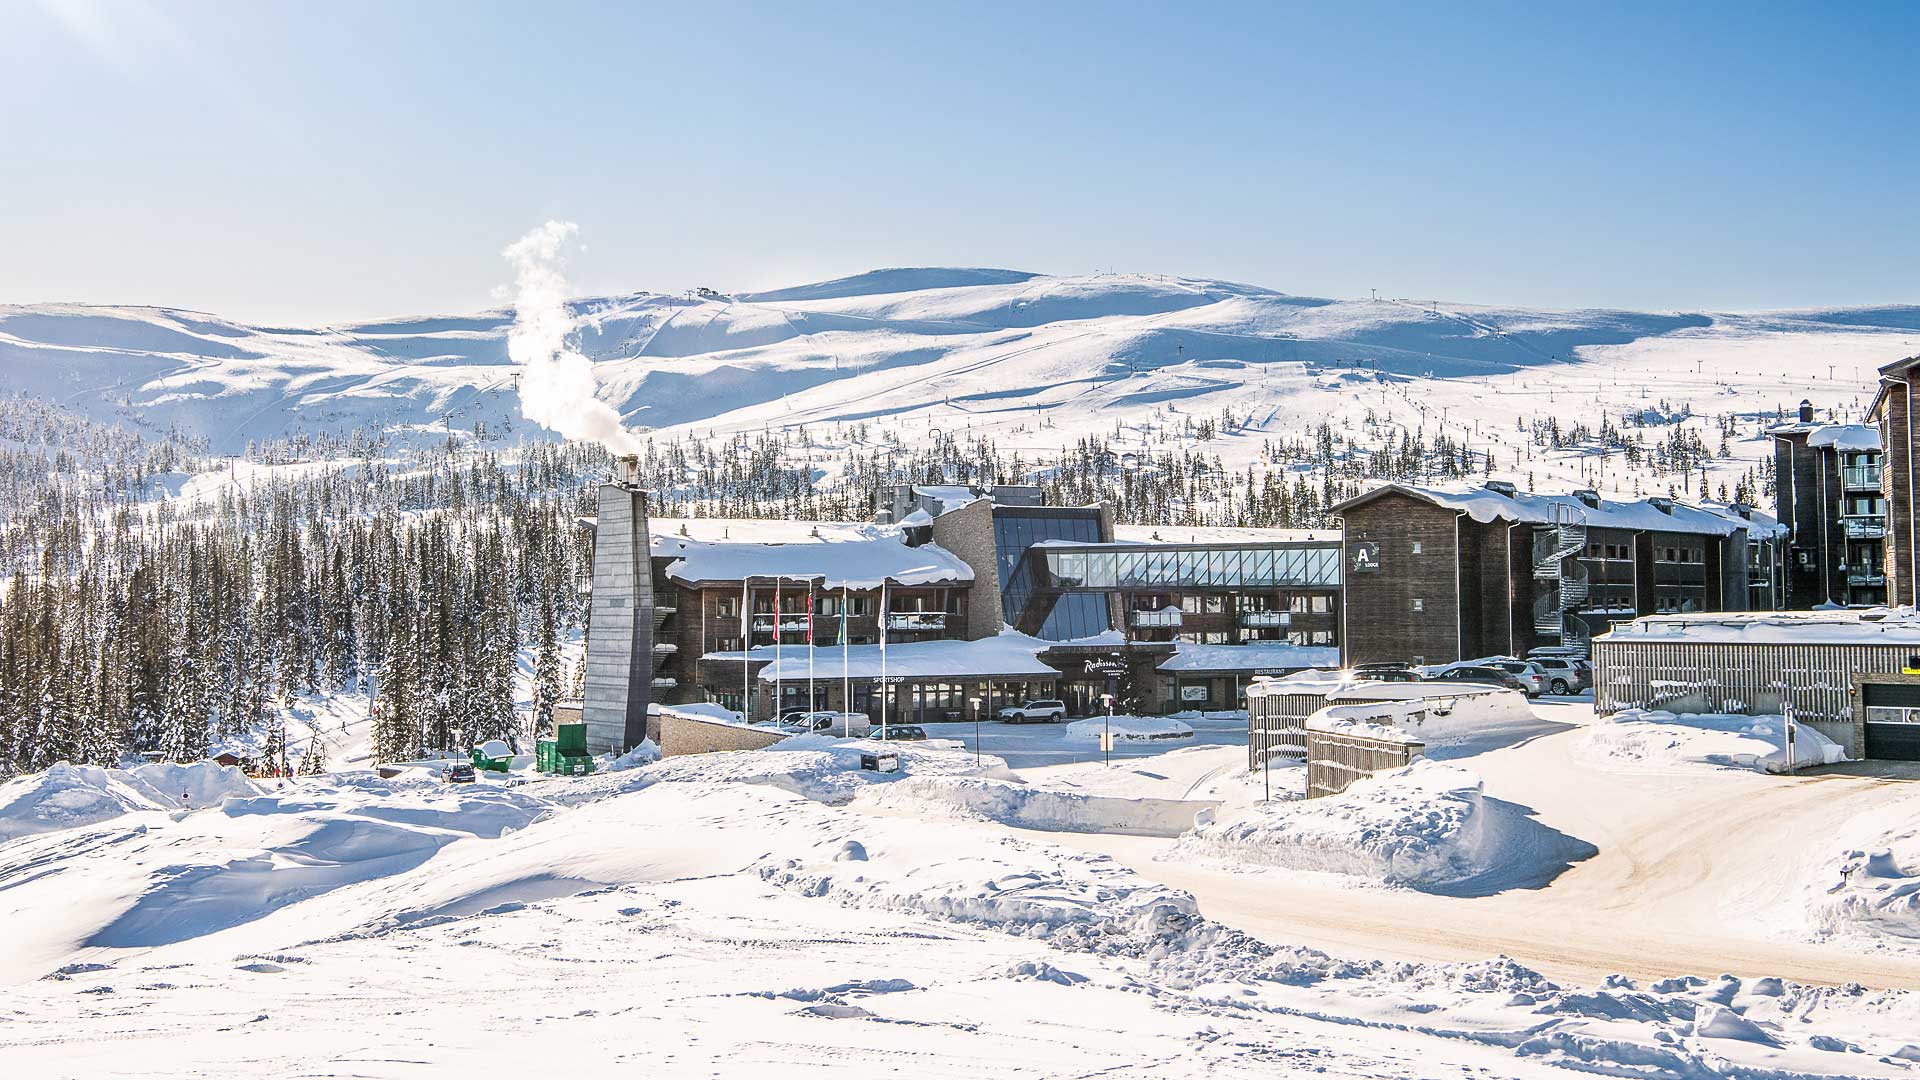 The lodge trysil